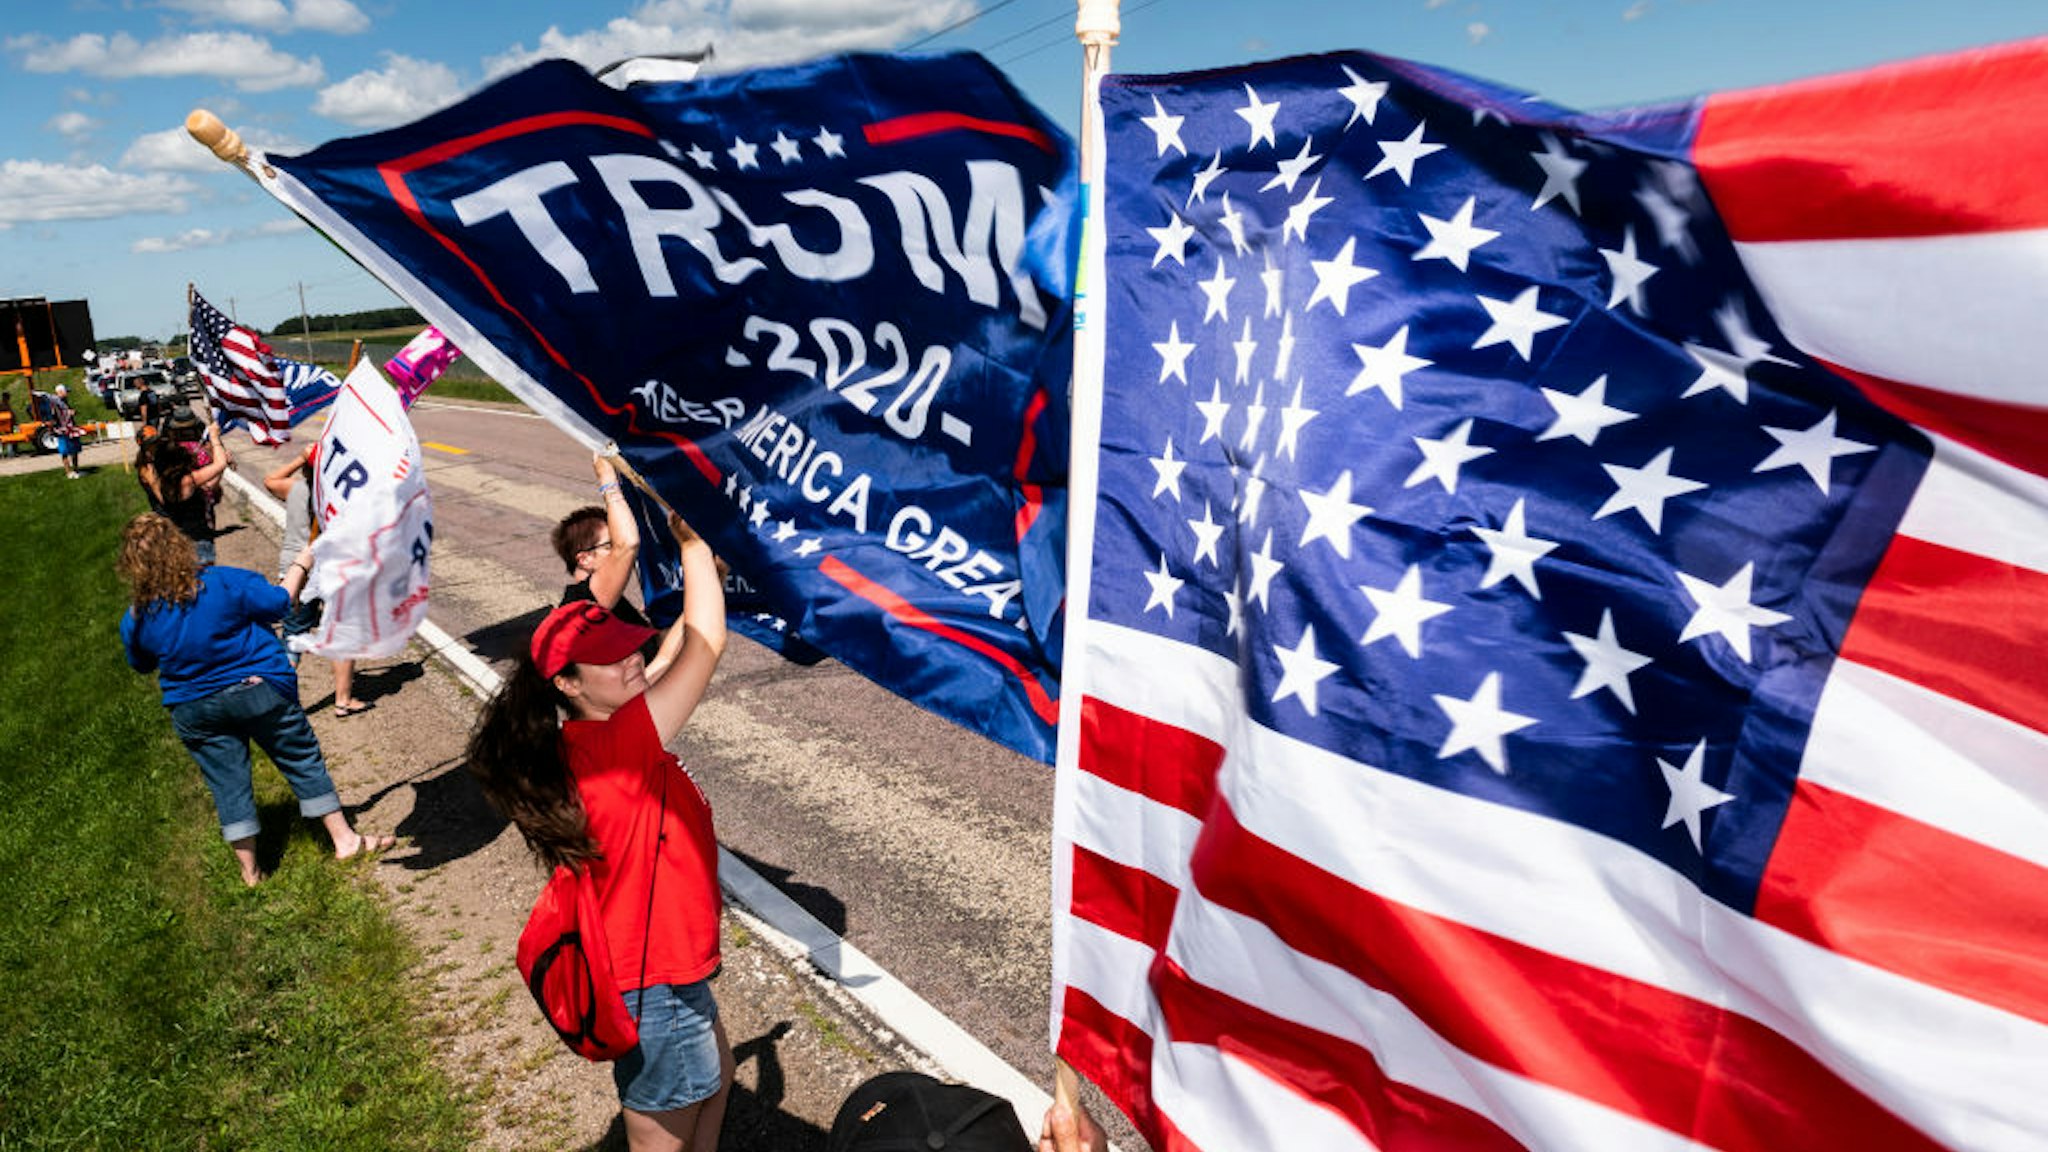 Supporters wave flags outside of Mankato Regional Airport as President Donald Trump makes a campaign stop on August 17, 2020 in Mankato, Minnesota.